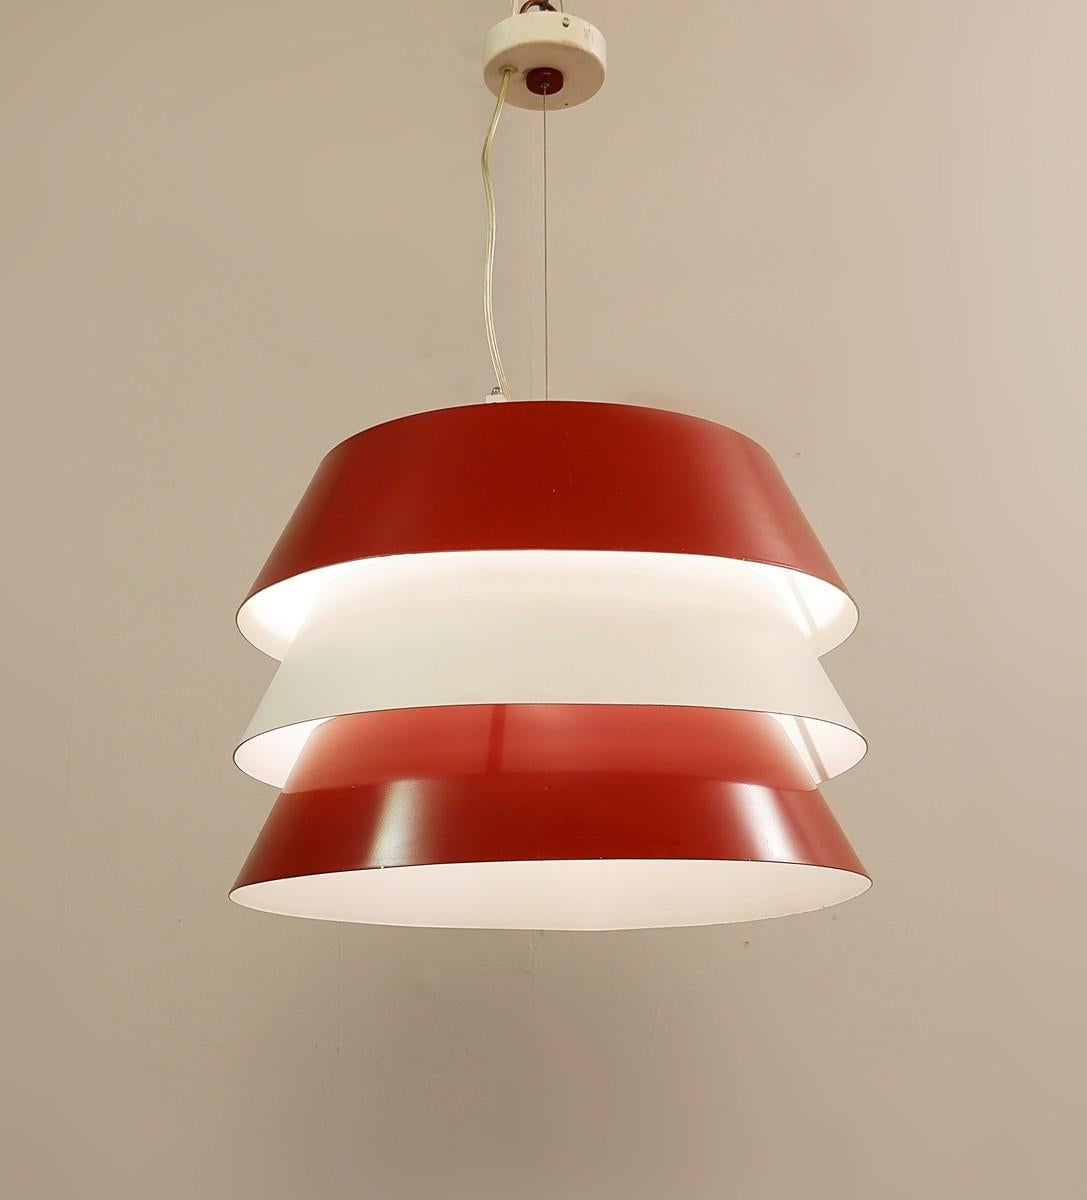 Italian Red and White Metal Pendant Lamp, 1960s For Sale 2